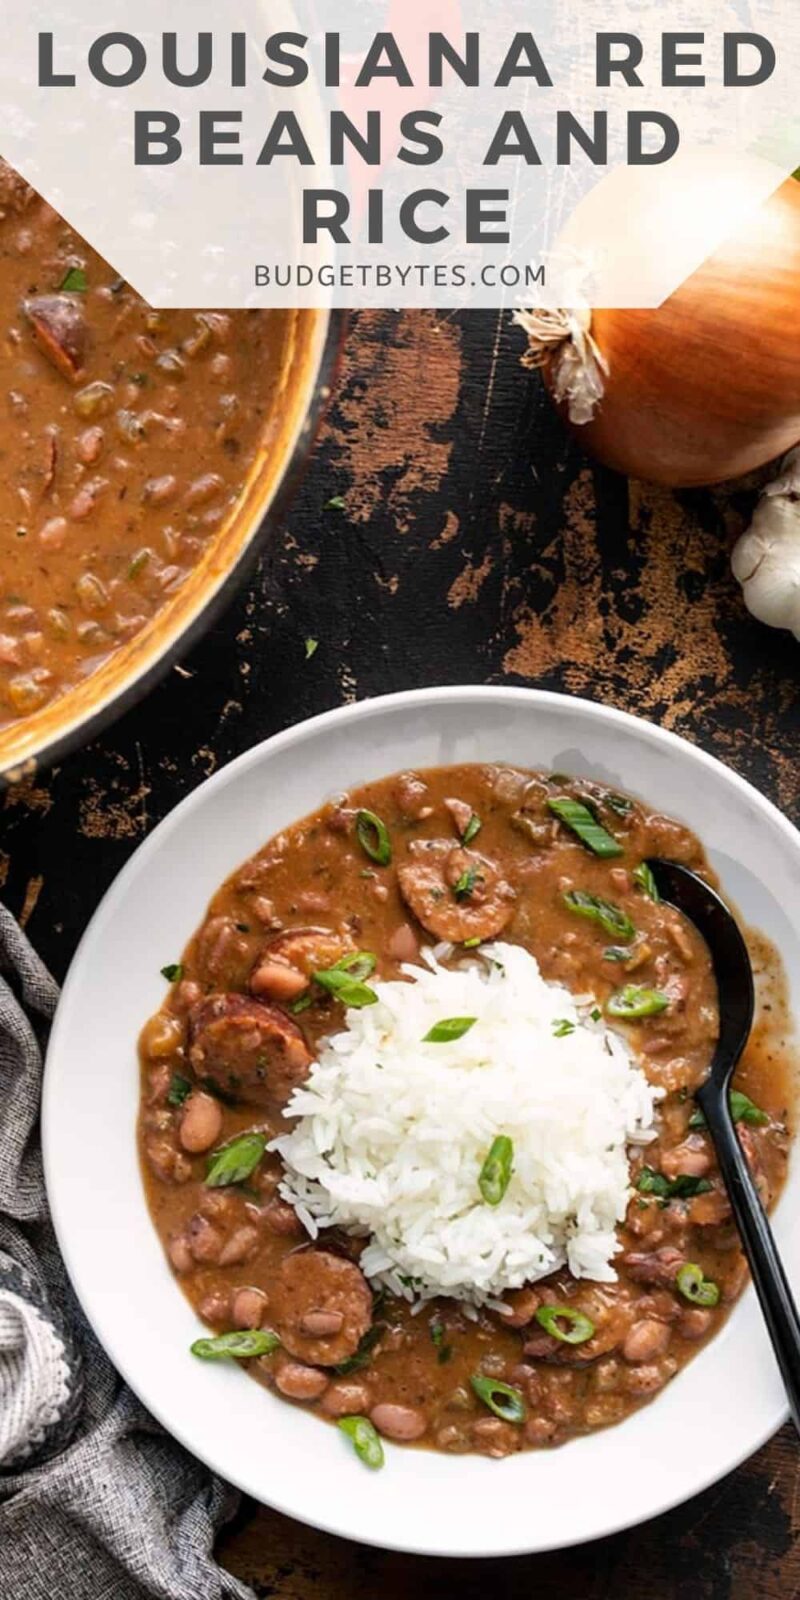 https://www.budgetbytes.com/wp-content/uploads/2020/02/Louisiana-Red-Beans-and-Rice-PIN1-800x1600.jpg